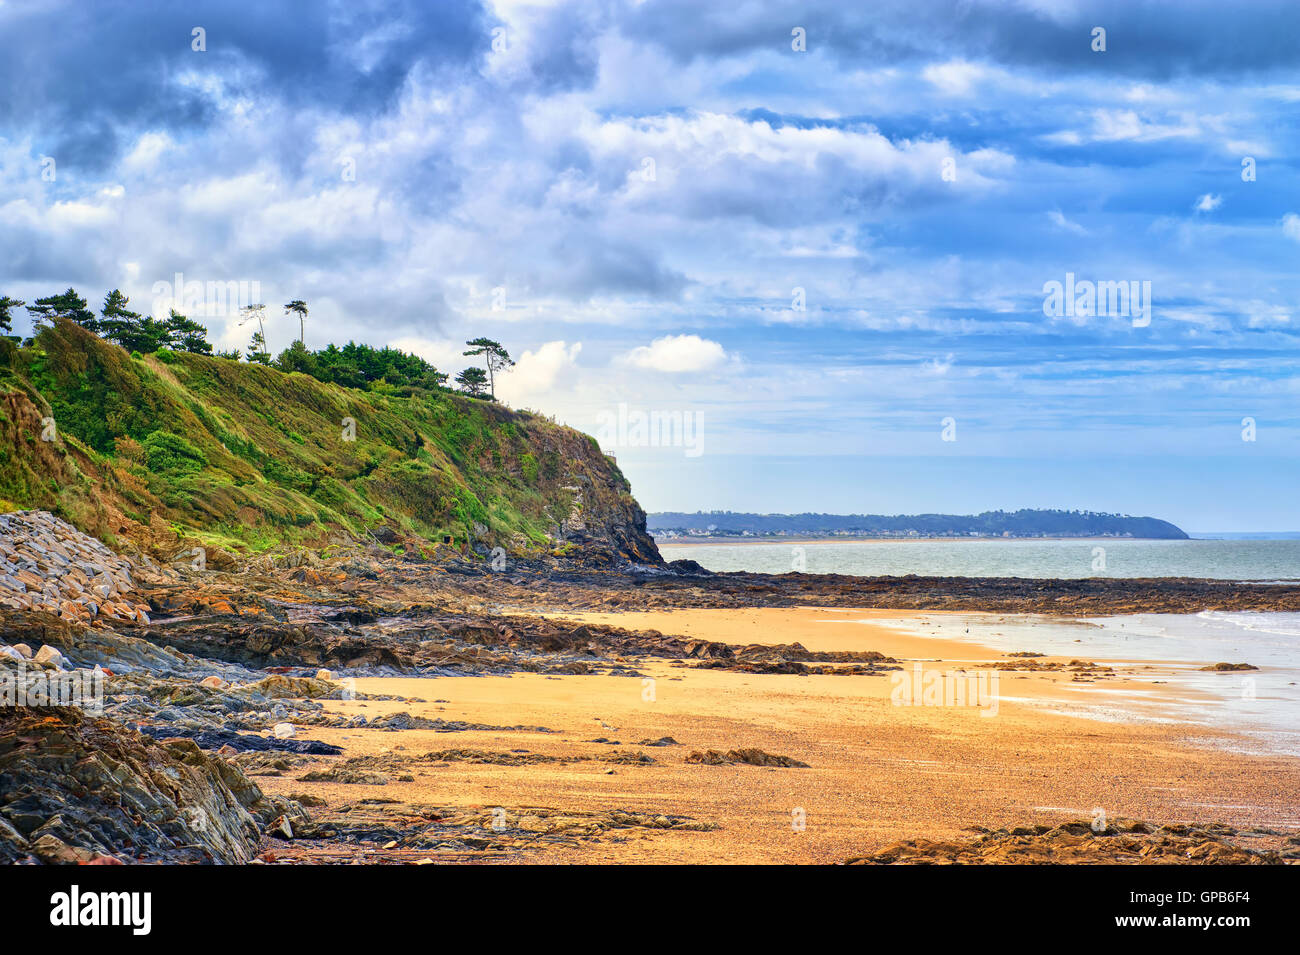 Desolated atlantic beach in Normandy by Granville, France Stock Photo